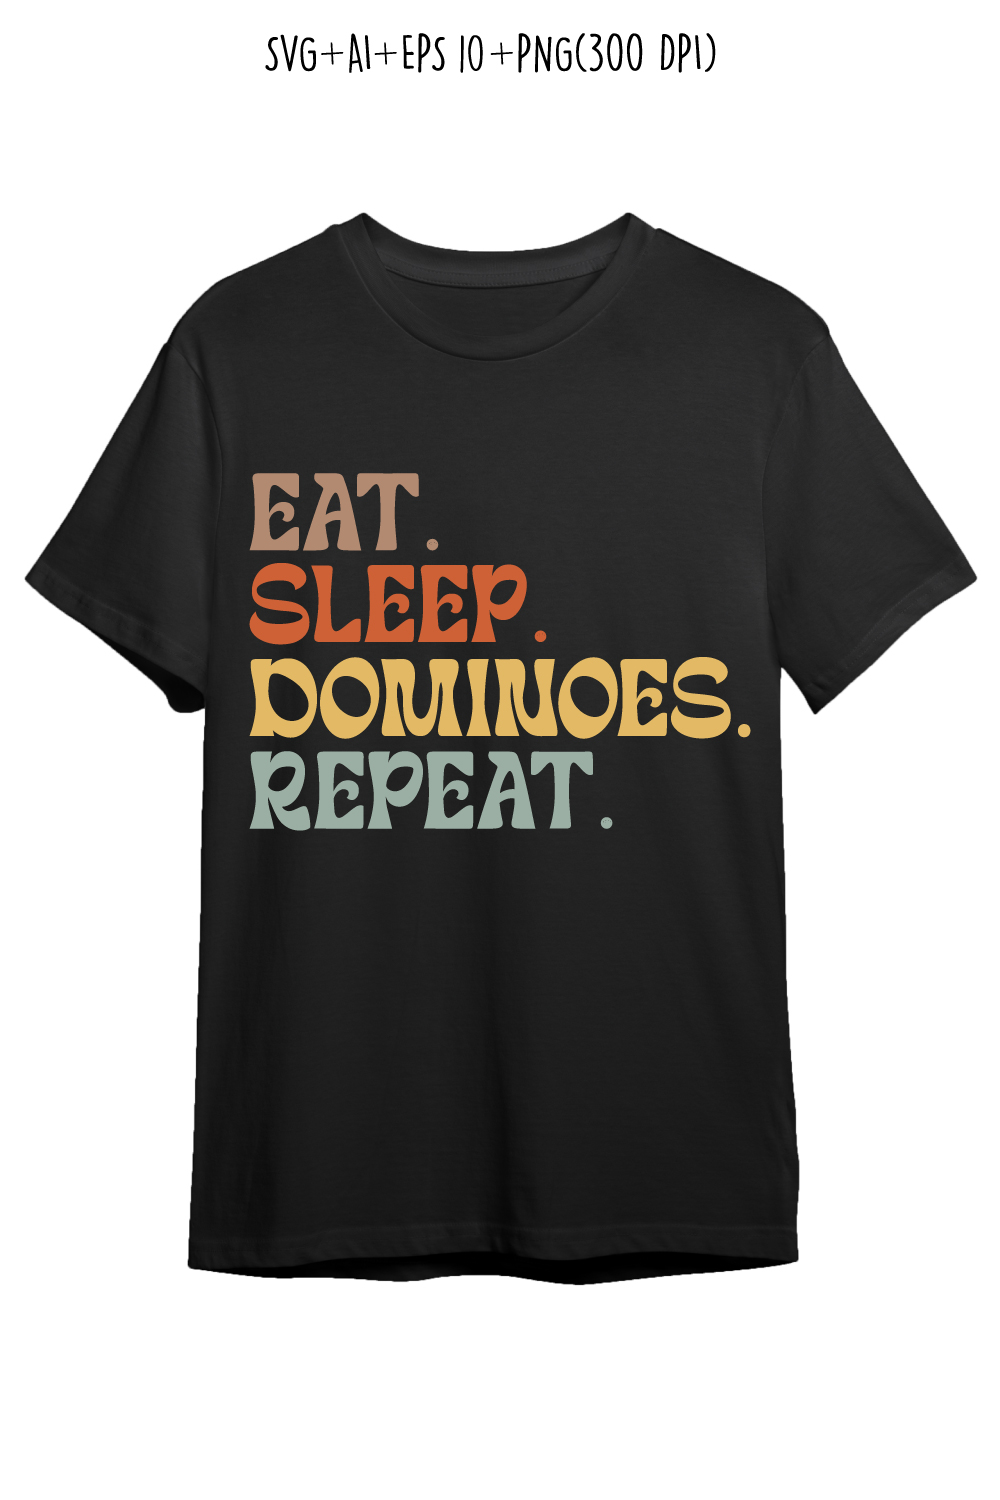 Eat Sleep Dominoes Repeat indoor game typography design for t-shirts, cards, frame artwork, phone cases, bags, mugs, stickers, tumblers, print, etc pinterest preview image.